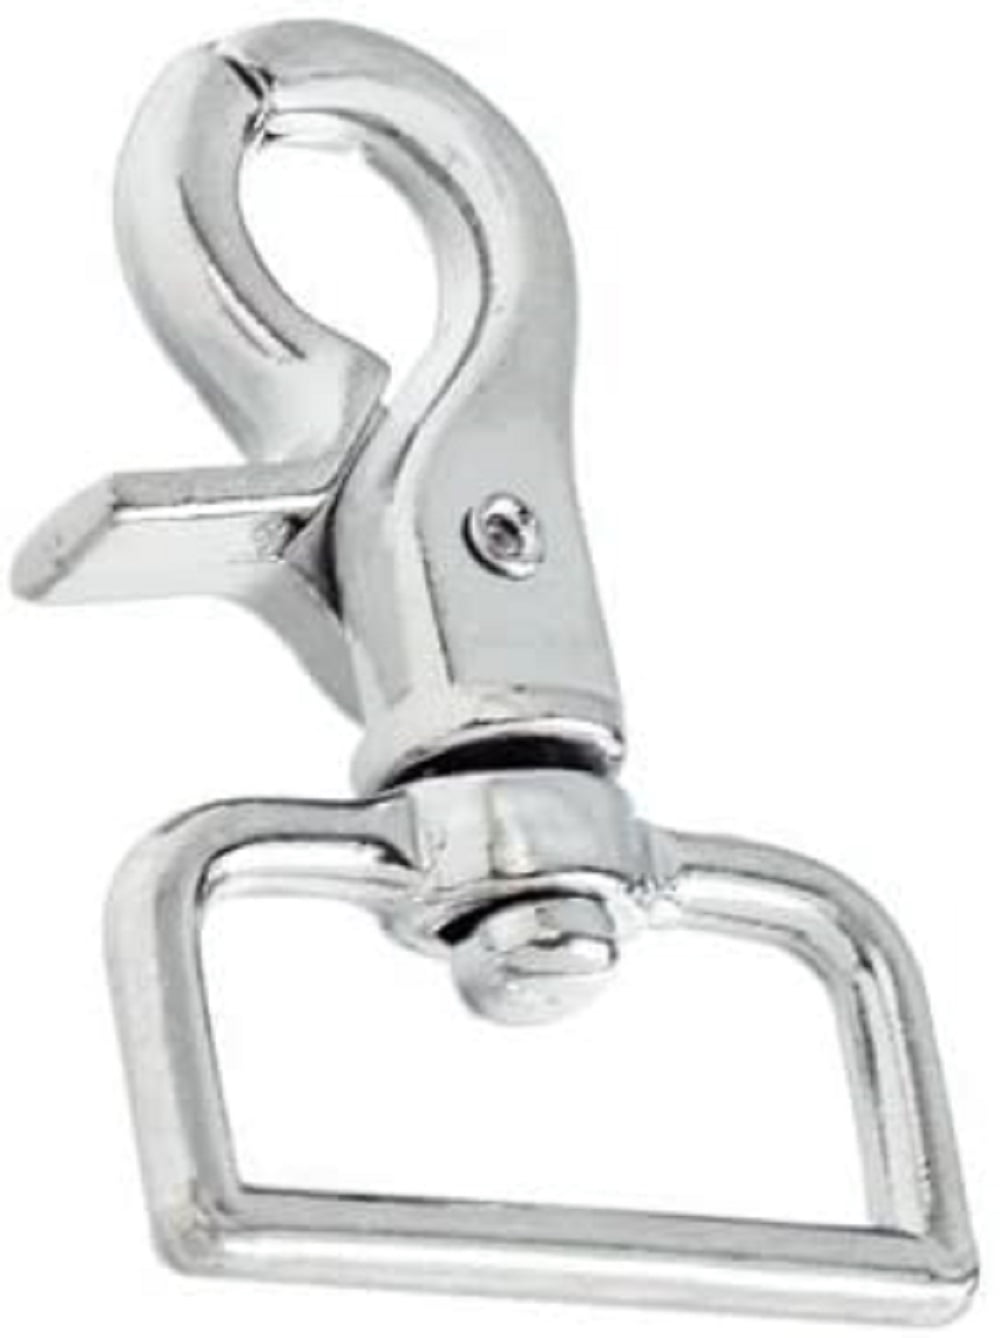 Purse & Bag Straps Protool Small Chrome Lobster Claw Trigger Snap Hook With Wide Swivel Eye